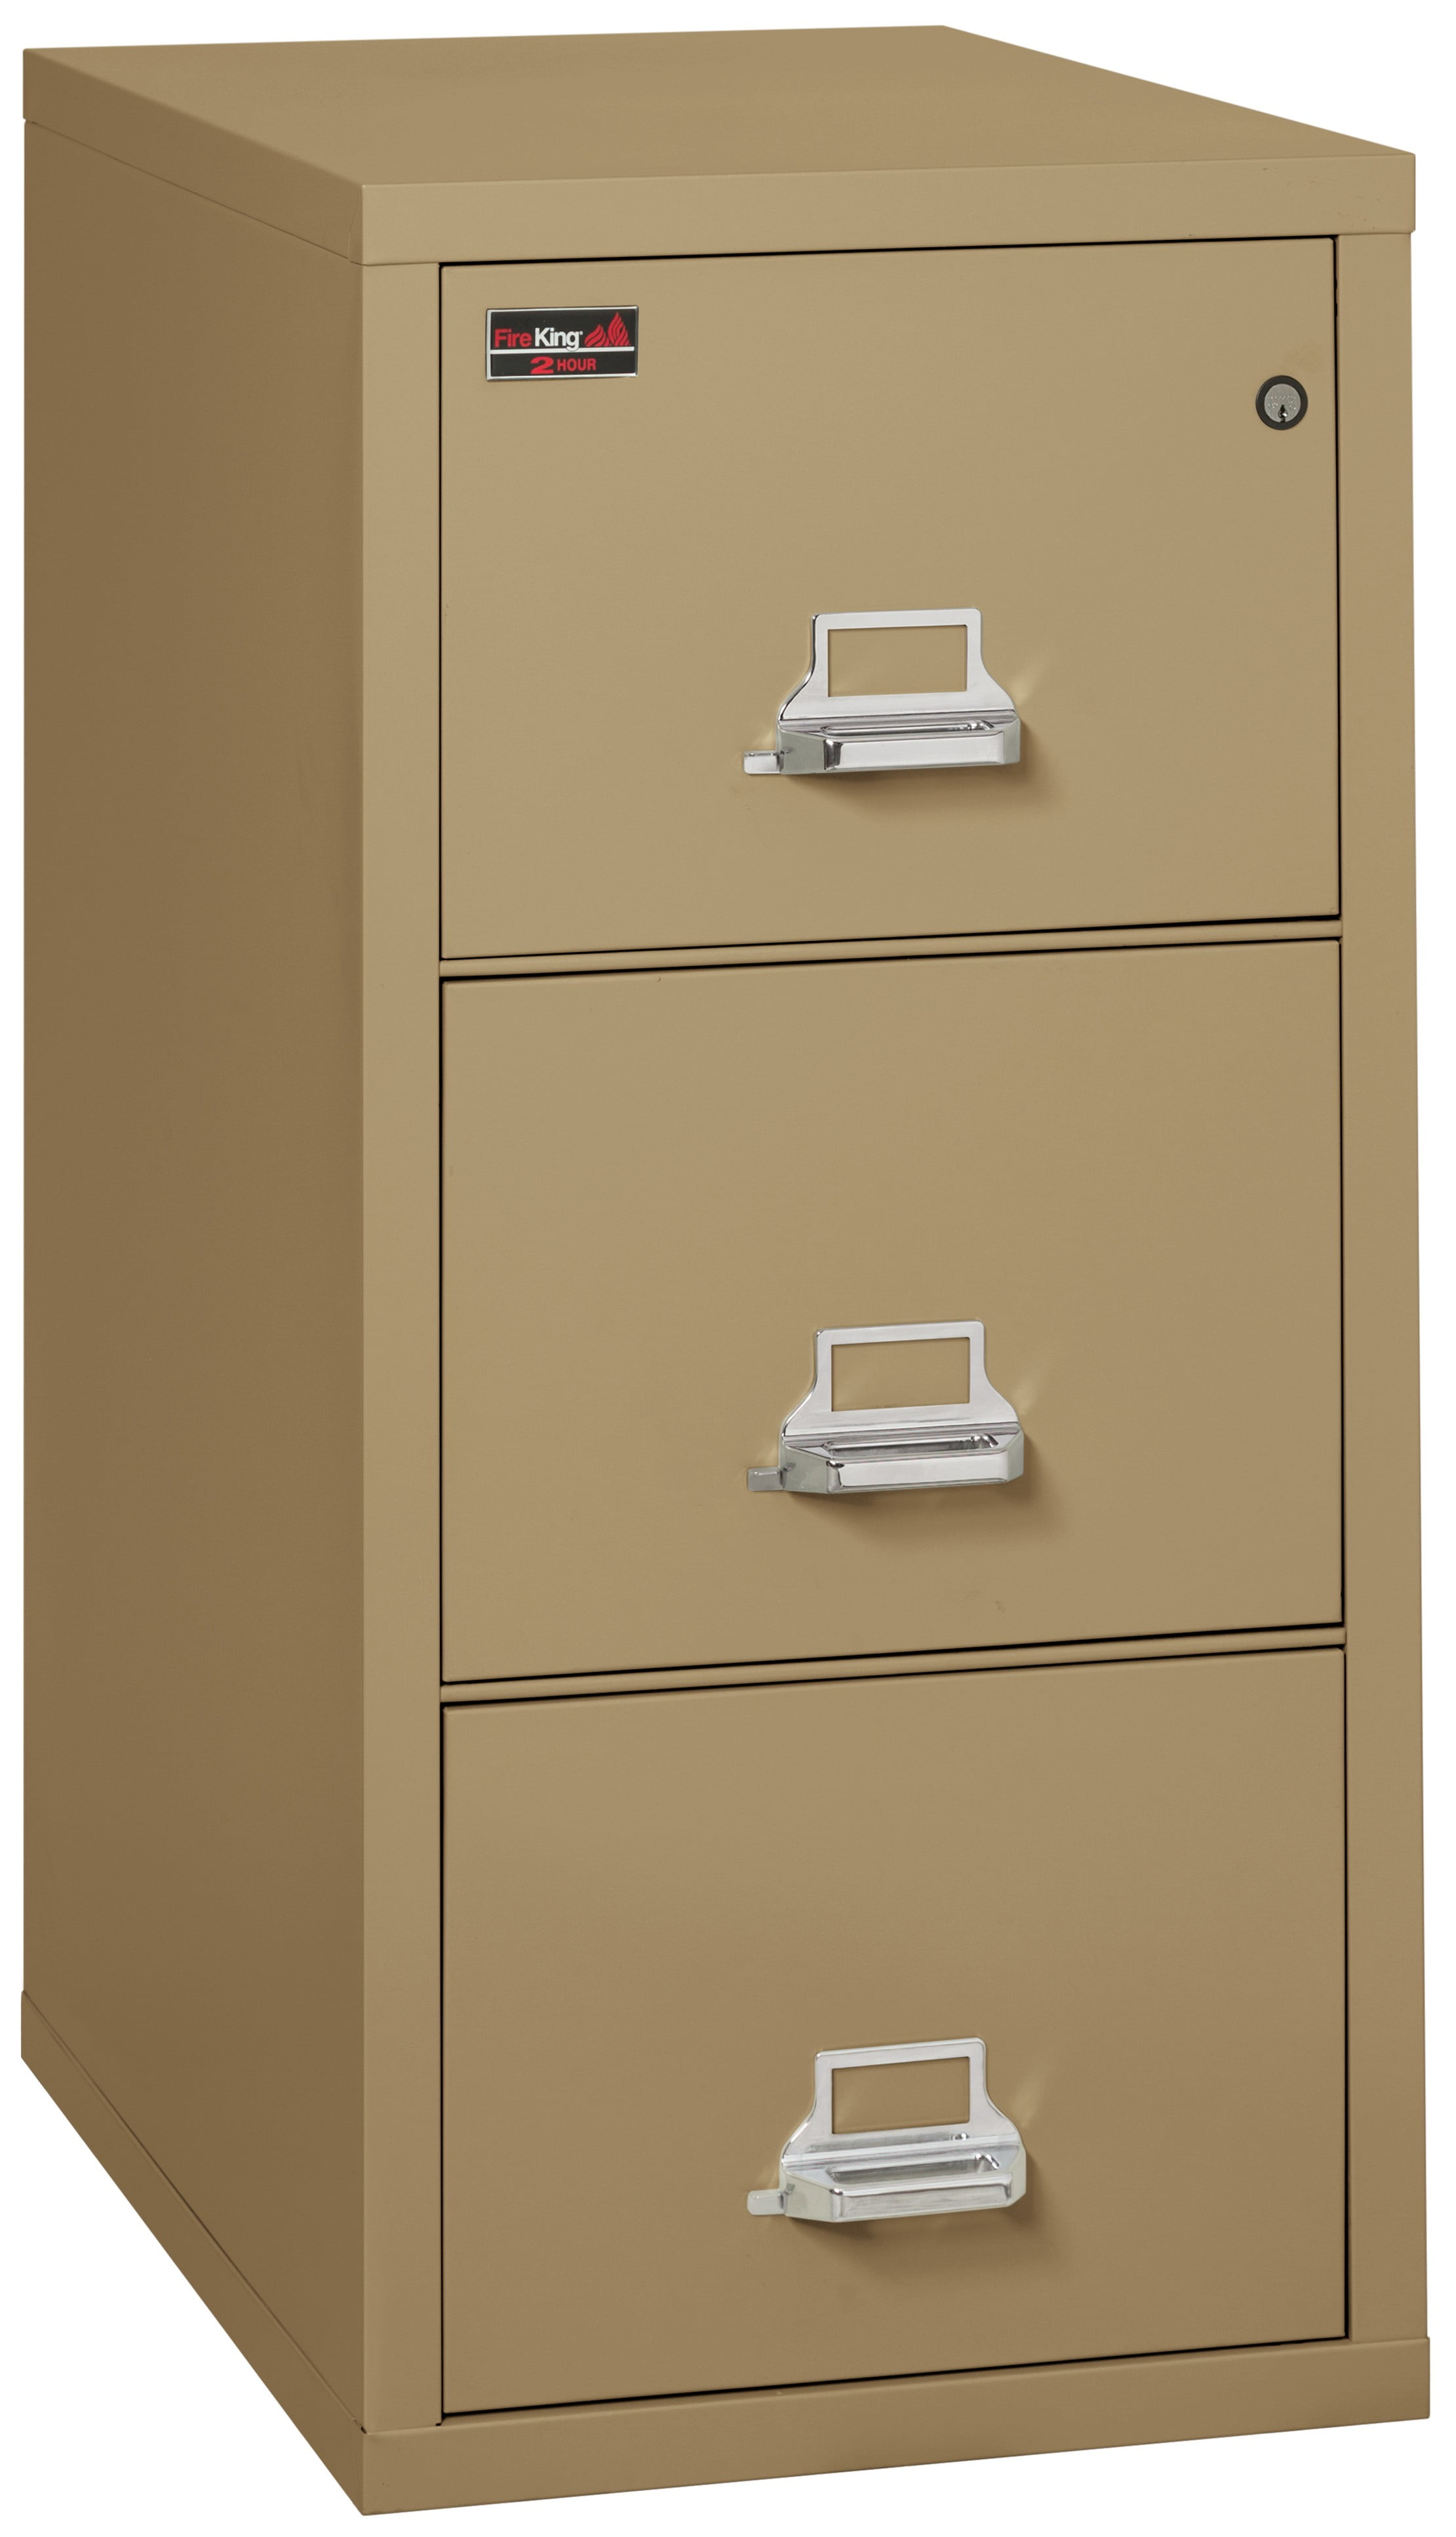 Fireking 3 Drawer Letter 2 Hour Rated fireproof File